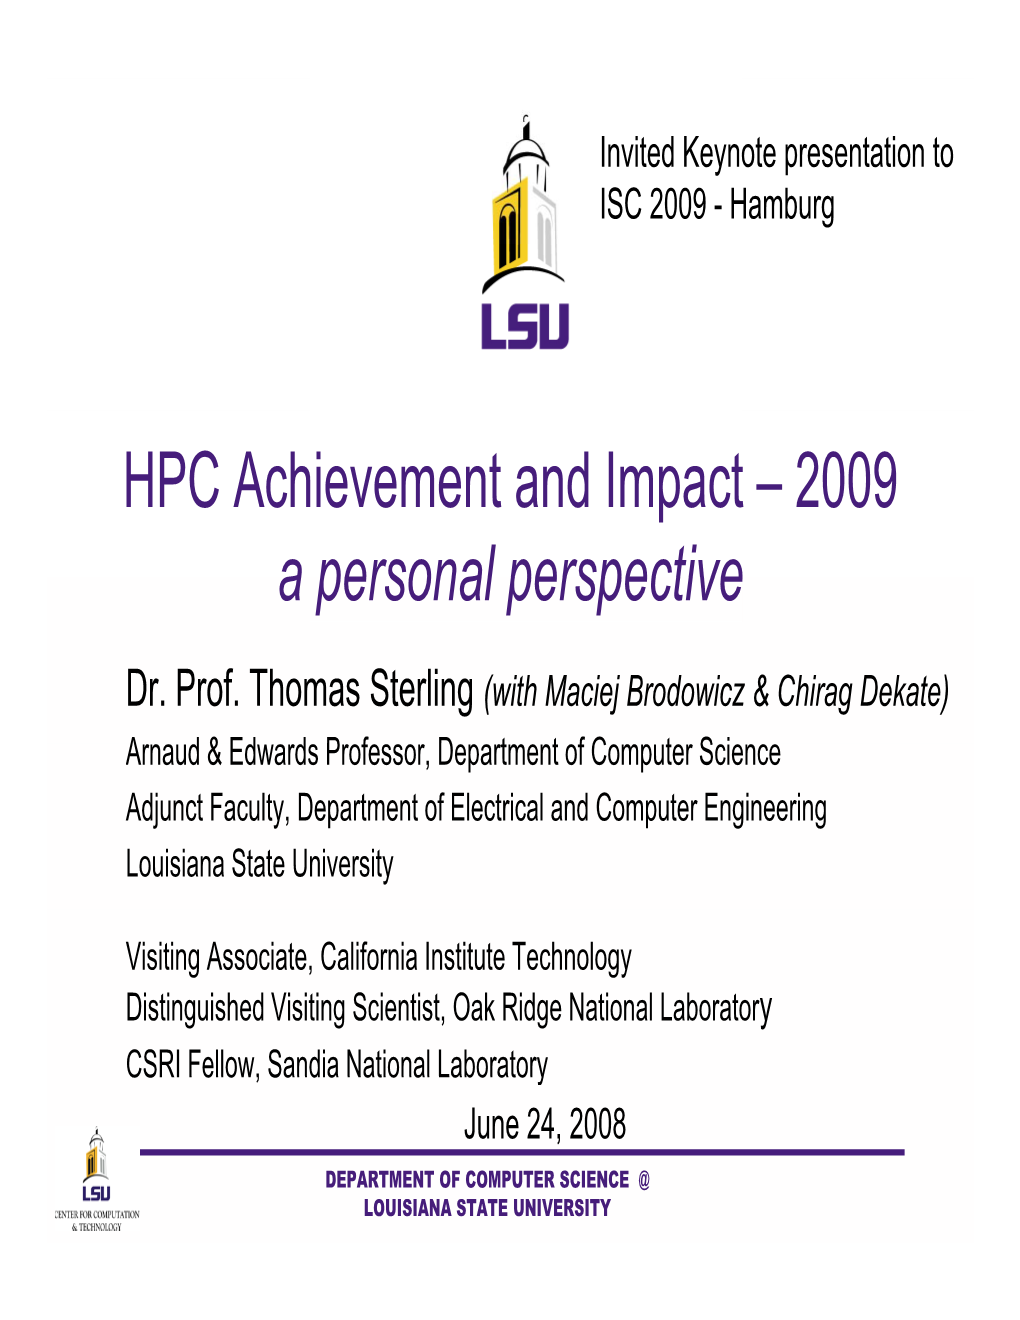 HPC Achievement and Impact – 2009 a Personal Perspective